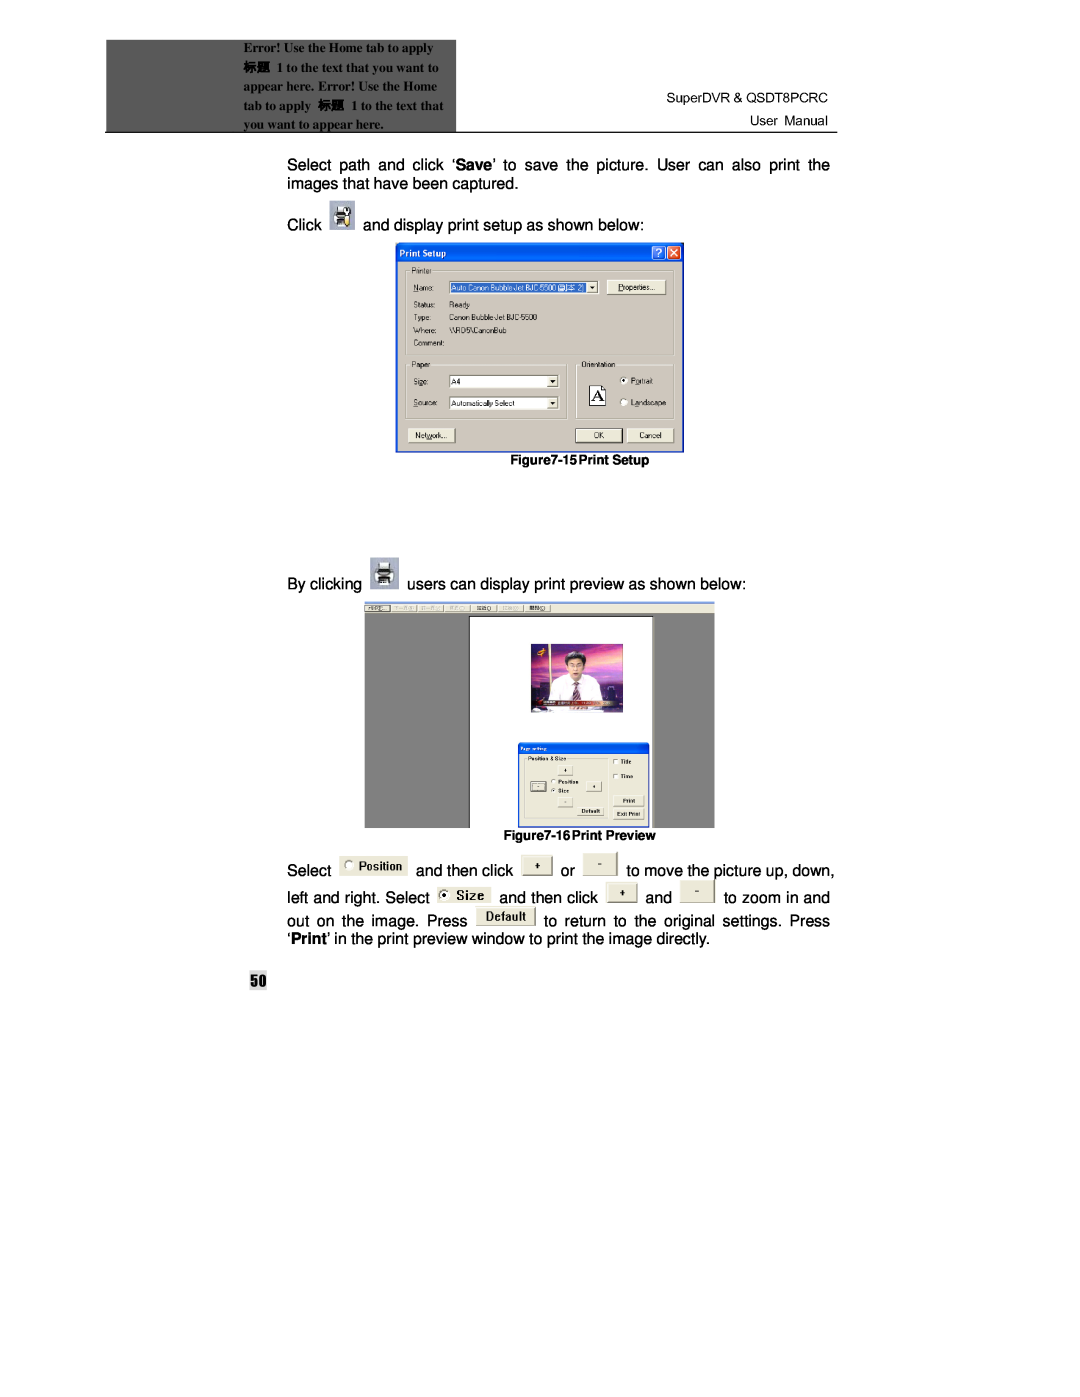 Q-See QSDT8PCRC manual User Manual, images that have been captured, and display print setup as shown below 